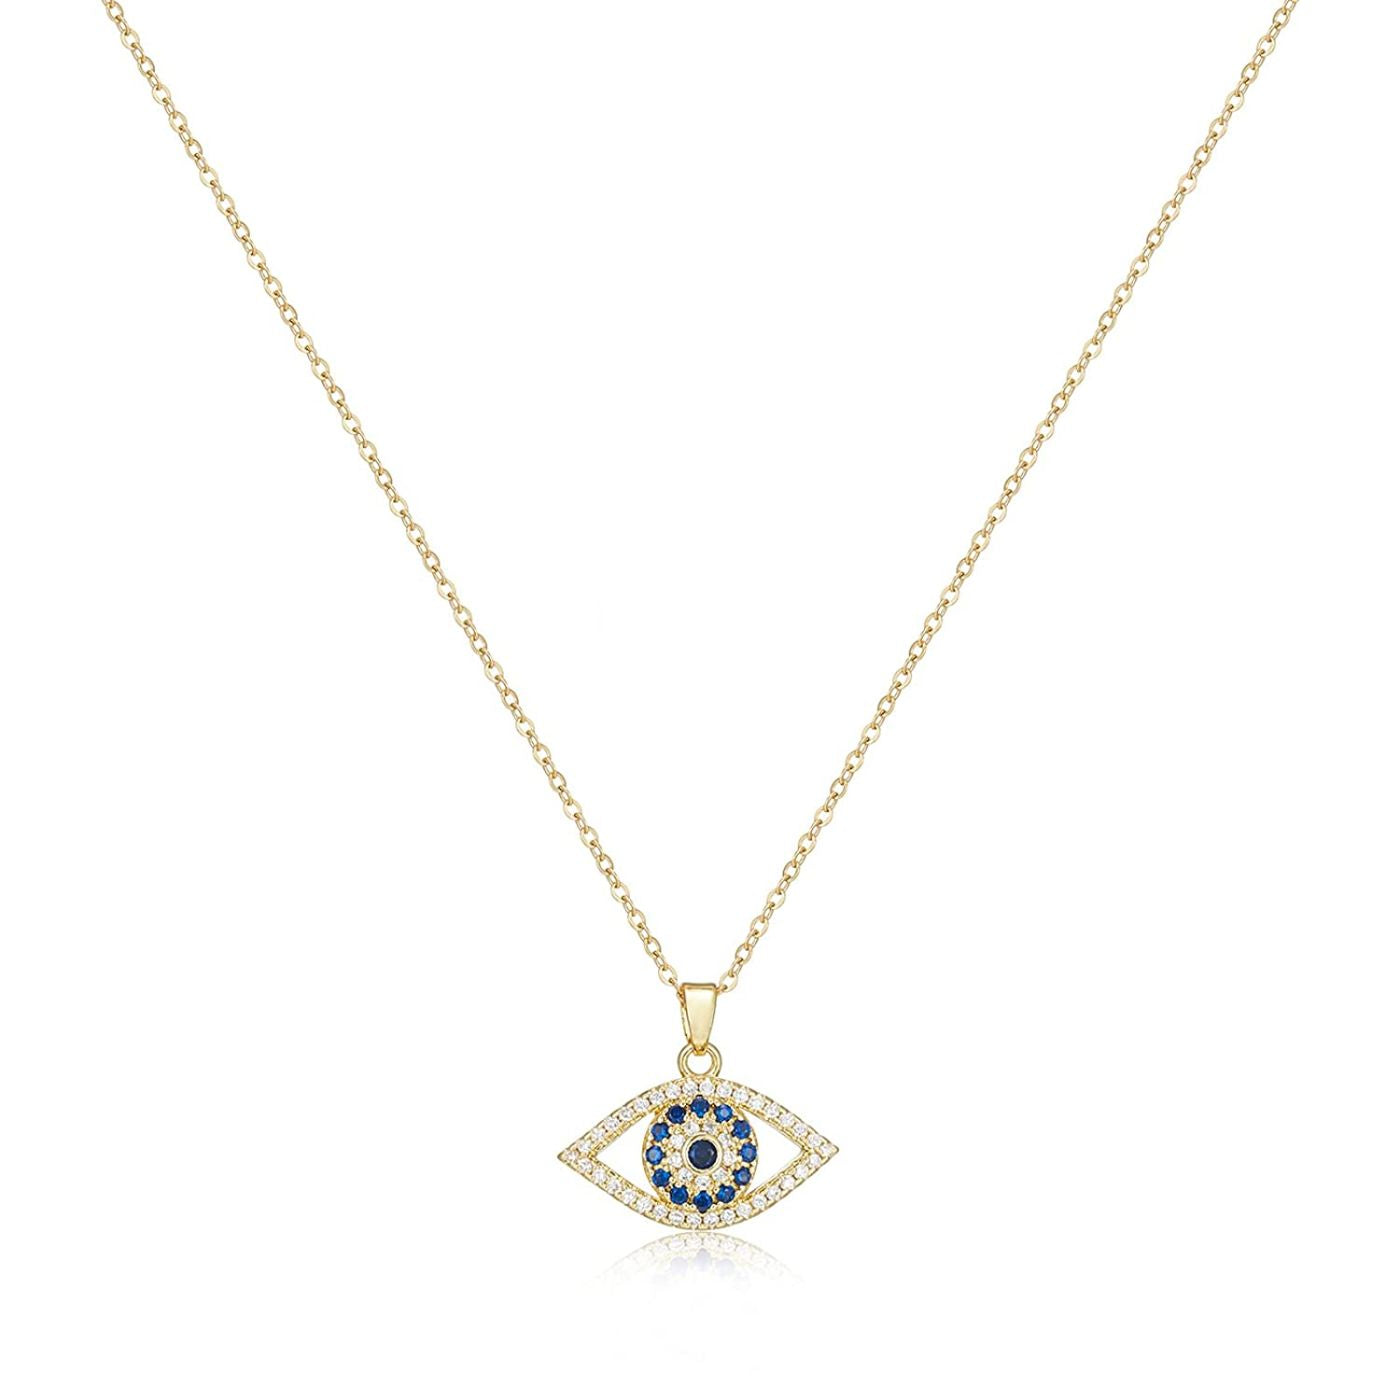 Blue Crystal Evil Eye Protector 14k Gold Plated Necklace for Women